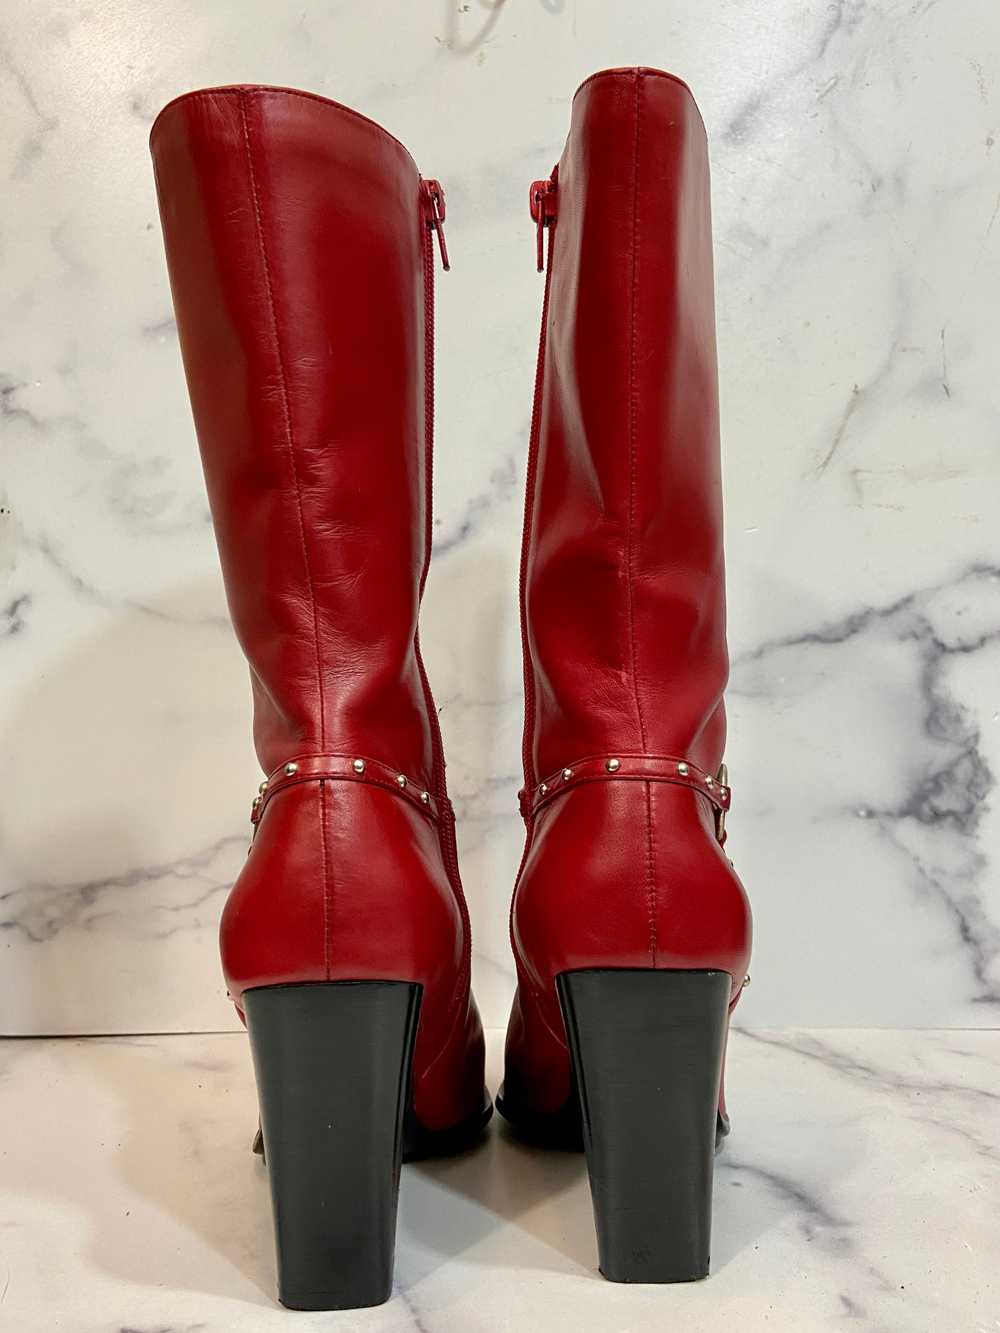 Motor Blaze red leather boots - image 11